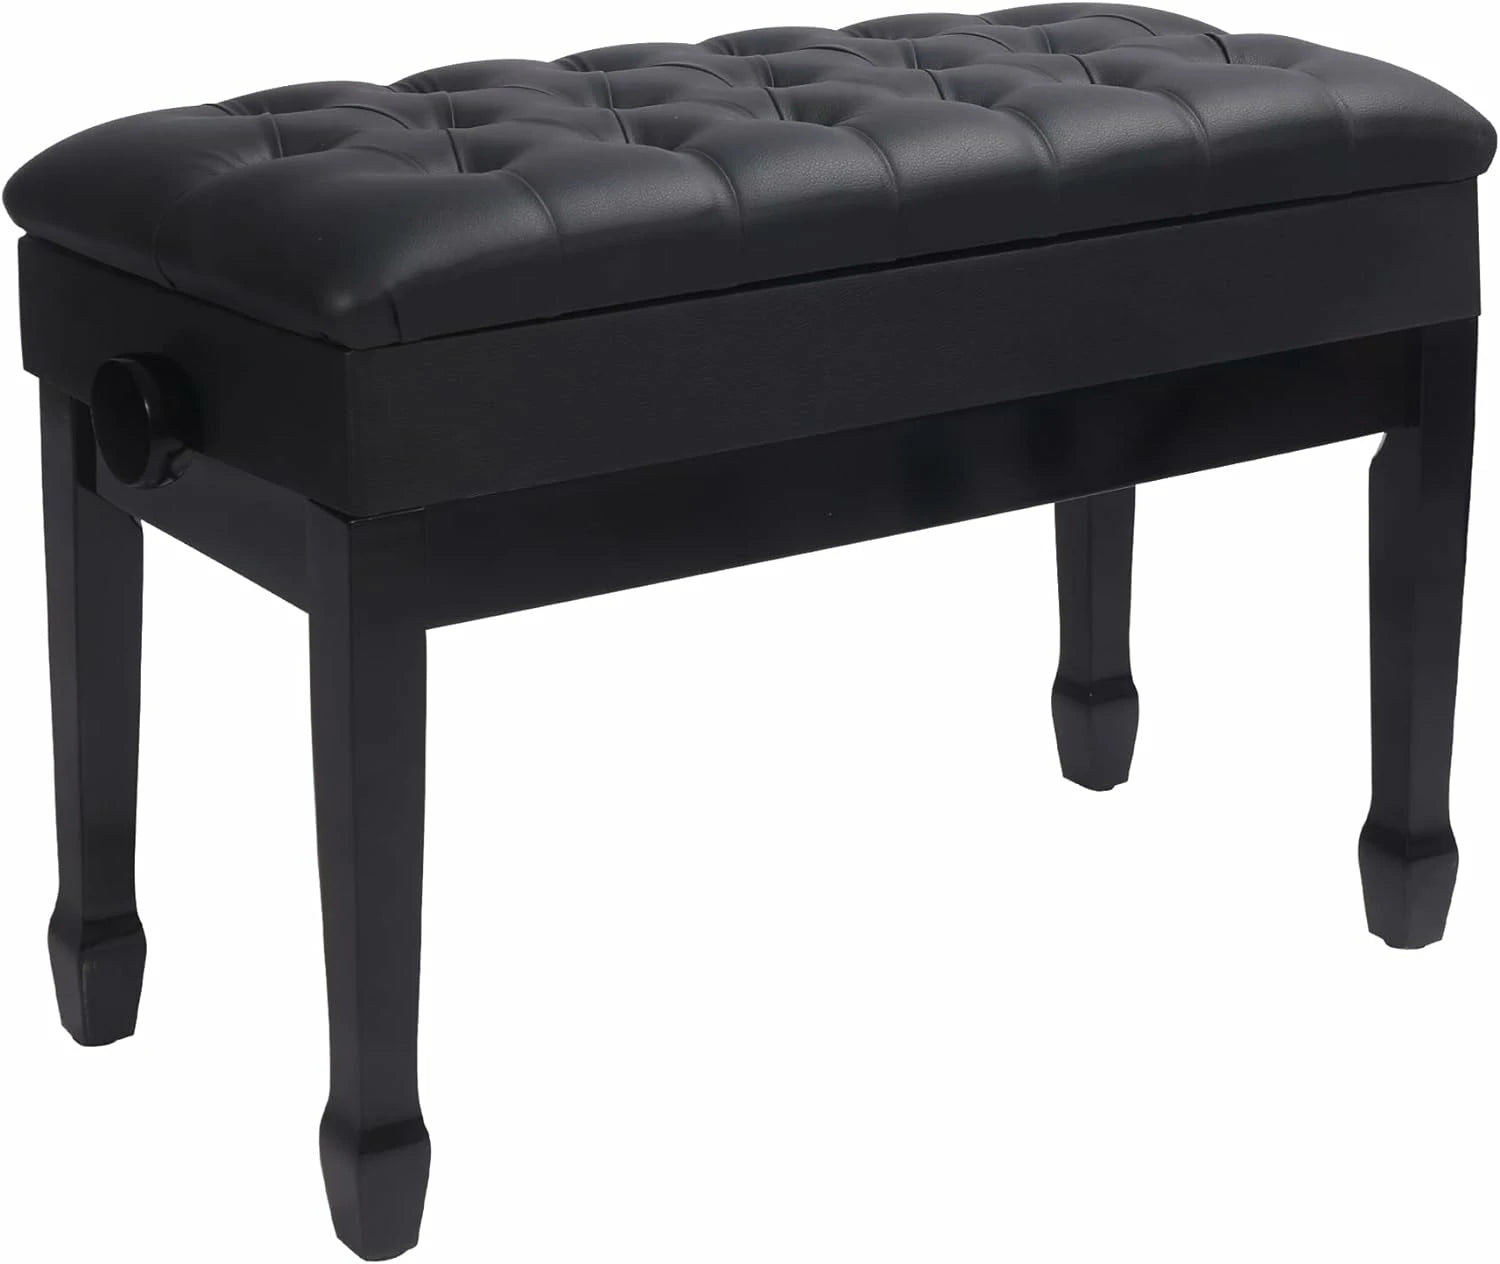 REDCAMP Adjustable Piano Bench with Cushion